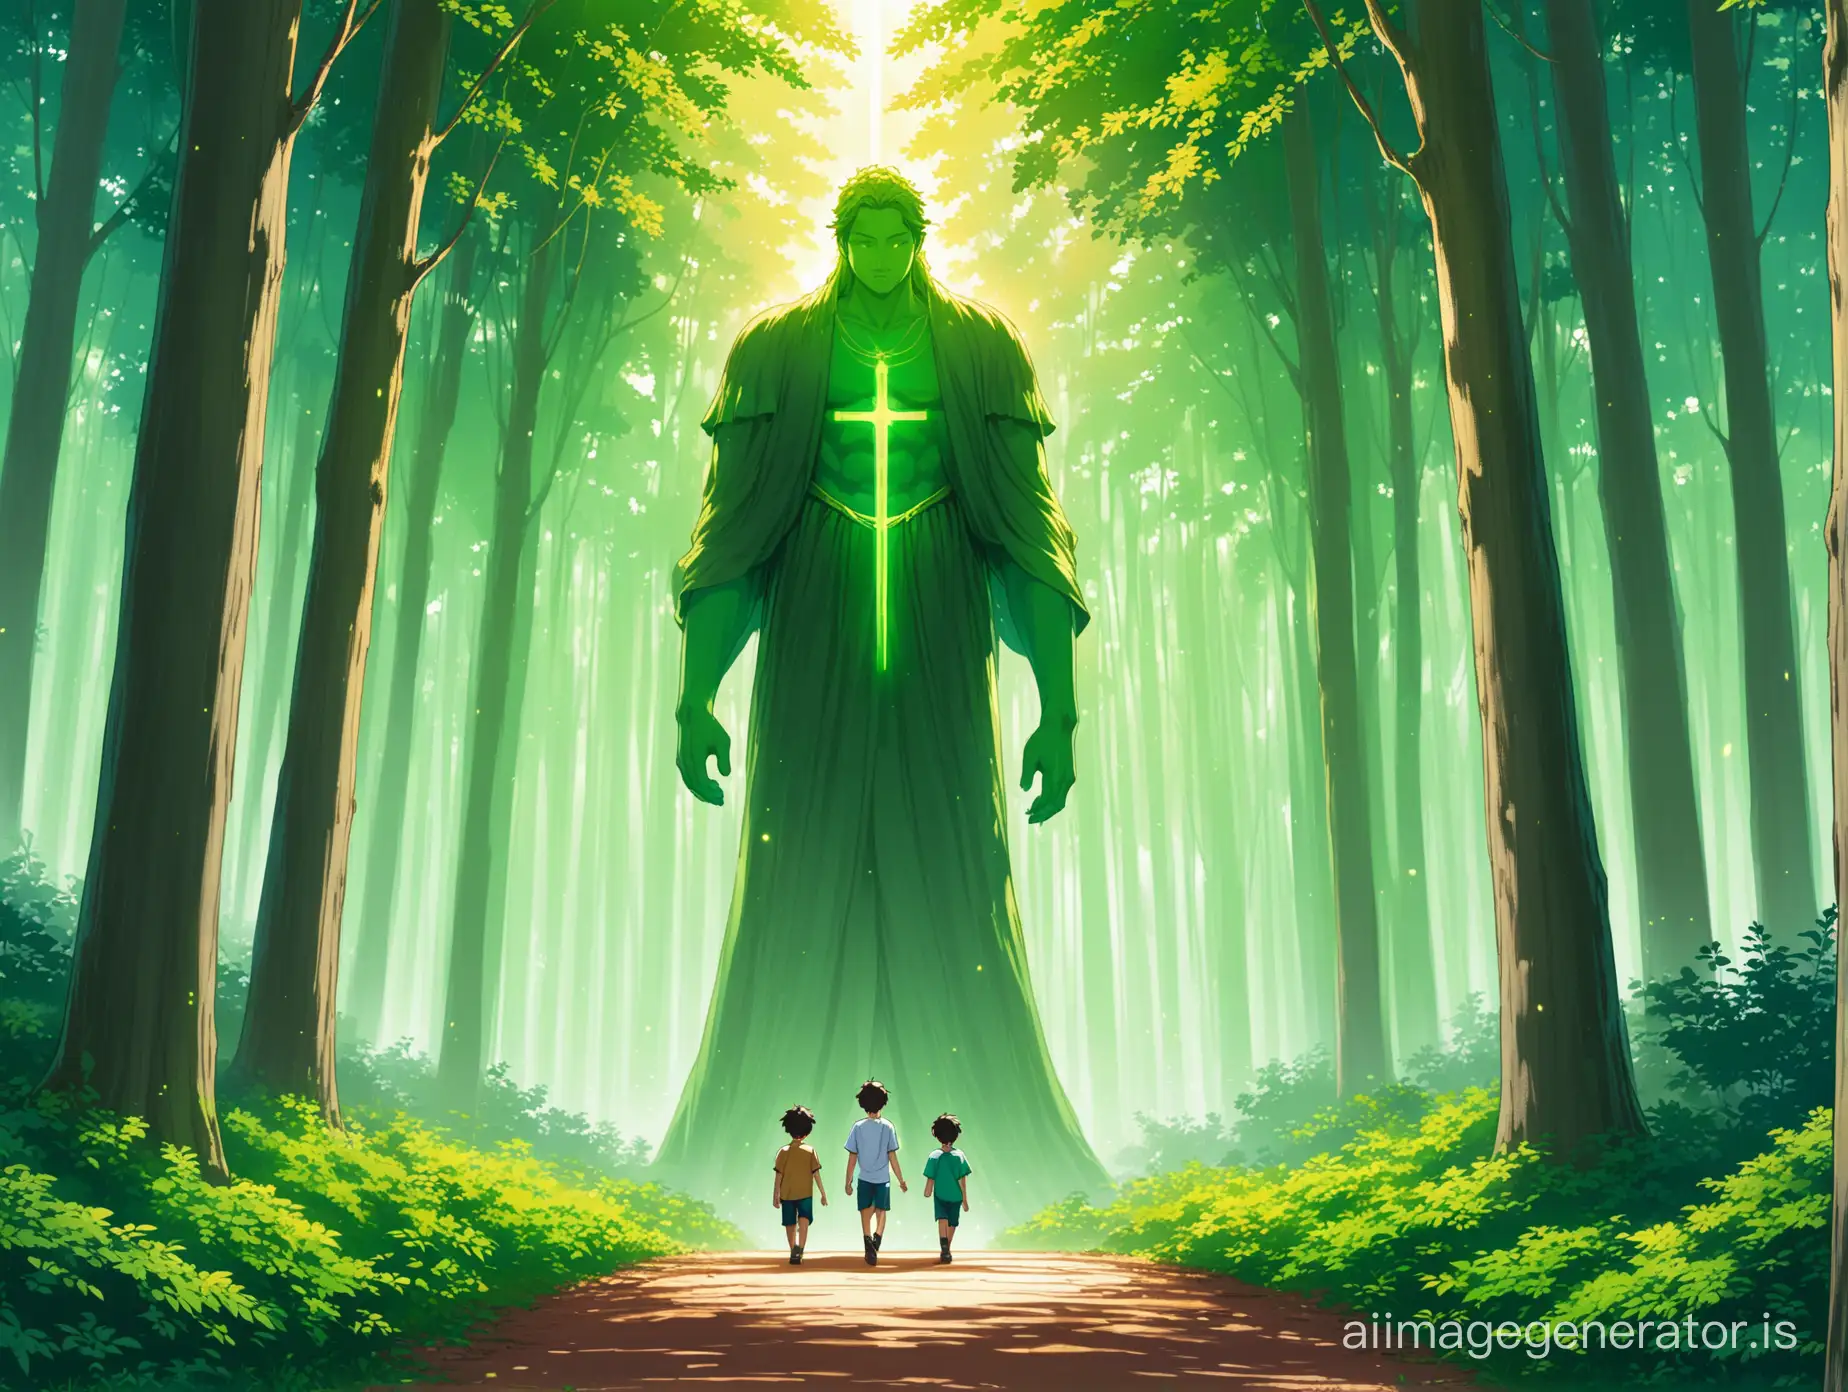 3 boys walking in a forest and a god appearing in front of them